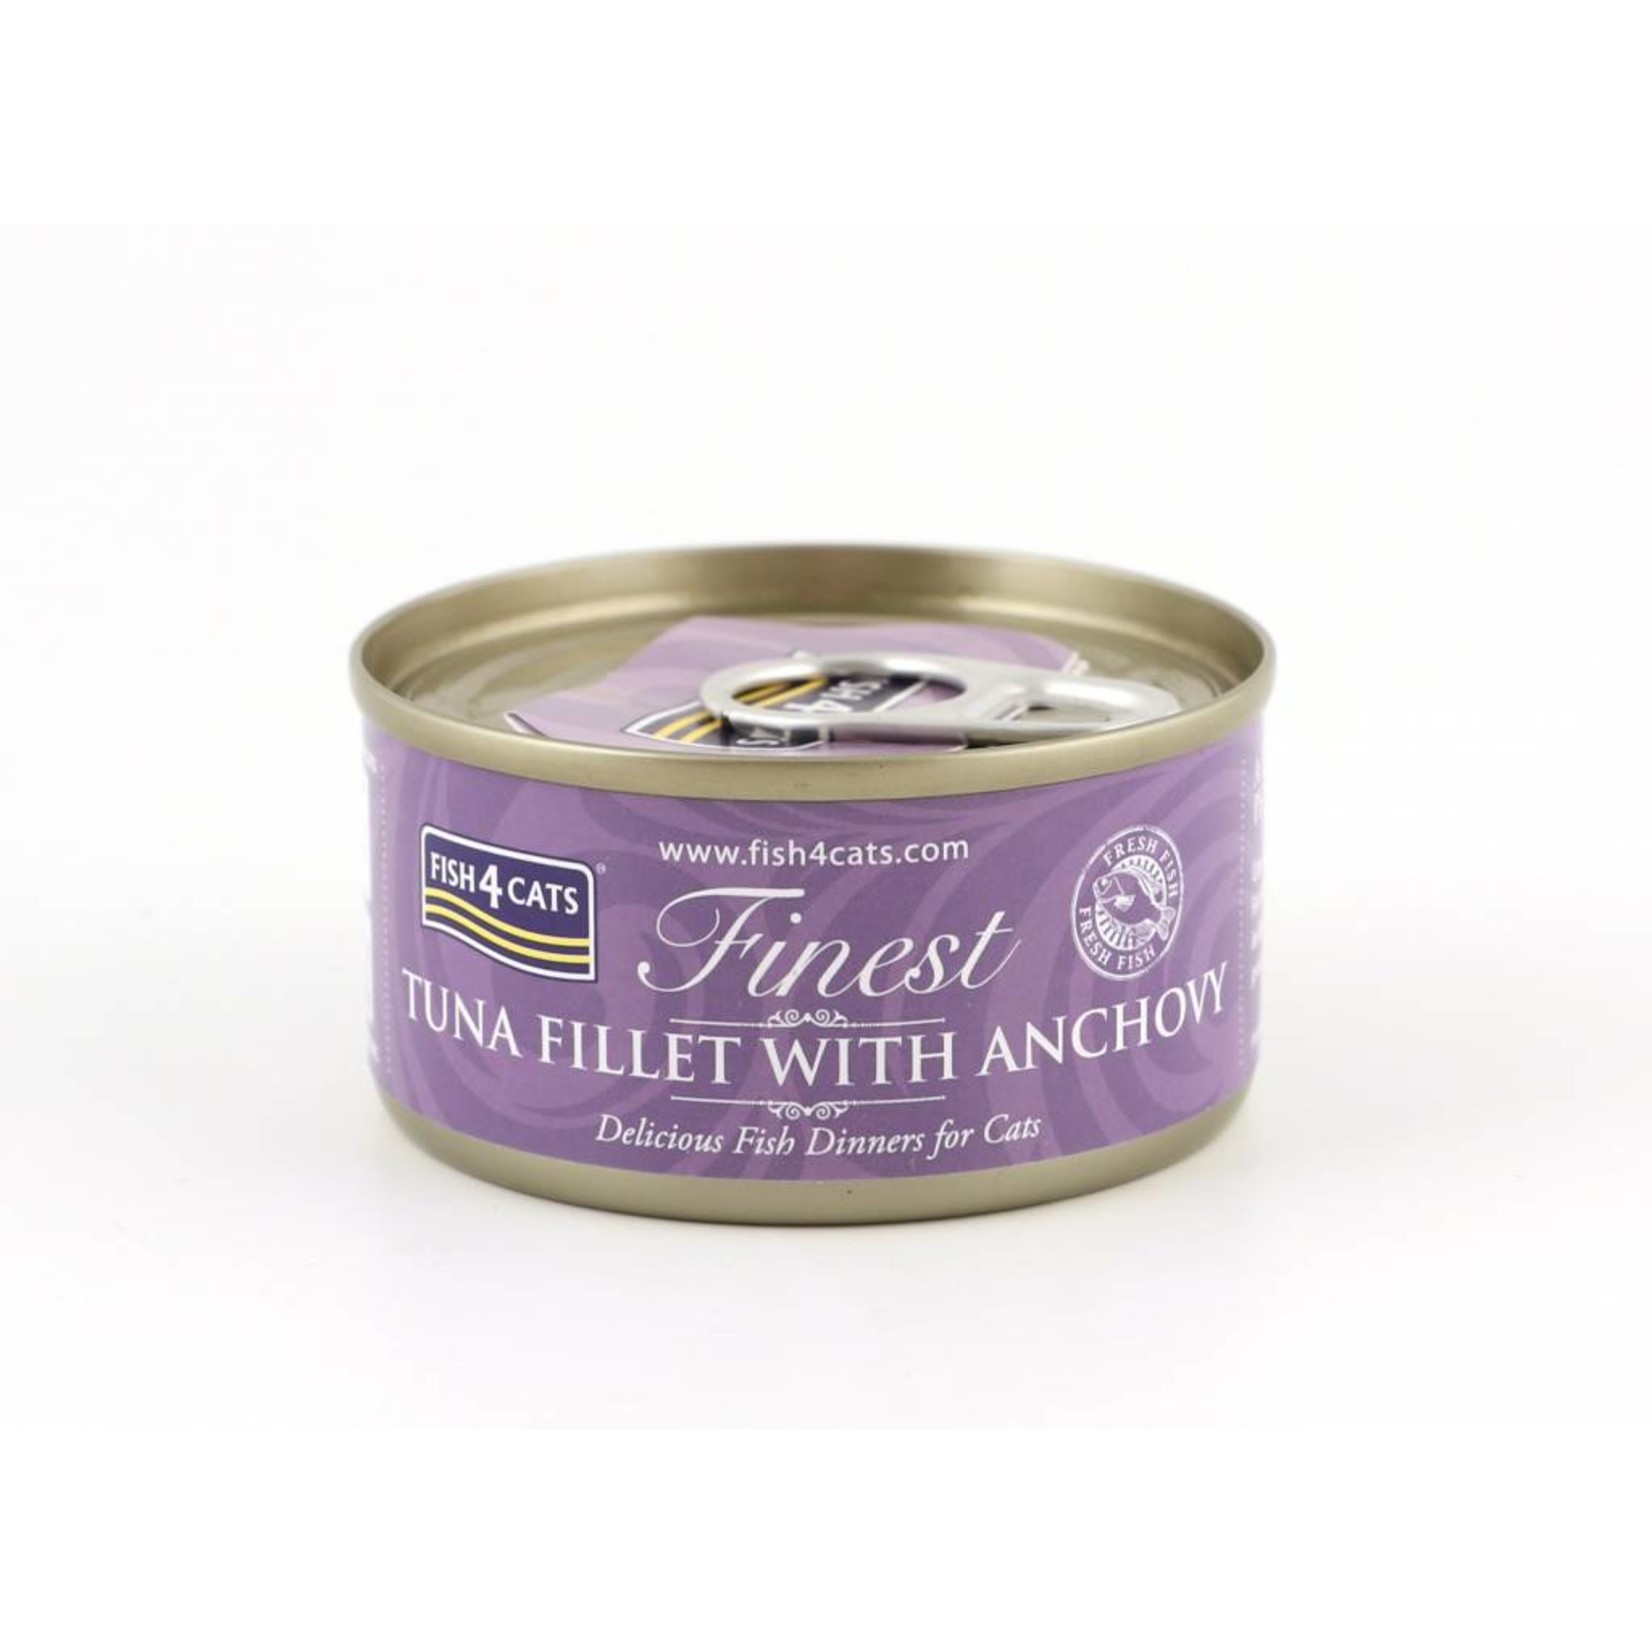 Fish4Cats Finest Tuna Fillet with Anchovy Wet Cat Food, 70g can